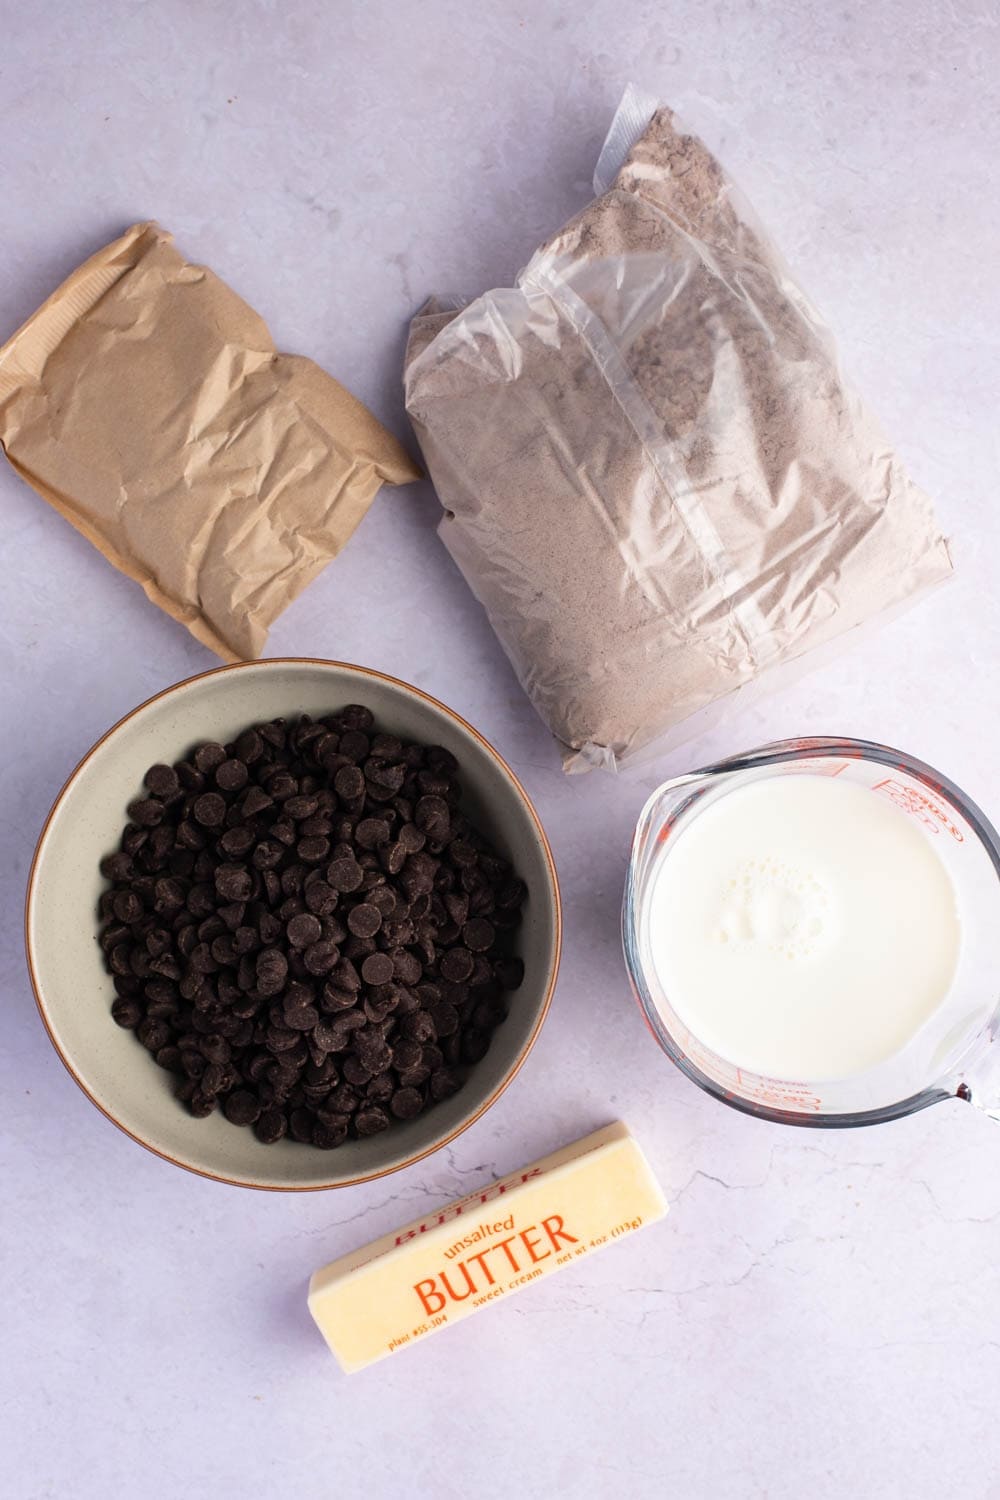 Chocolate Dump Cake Ingredients - Chocolate Cake Mix, Dry Pudding Mix, Whole Milk, Butter, and Chocolate Chips